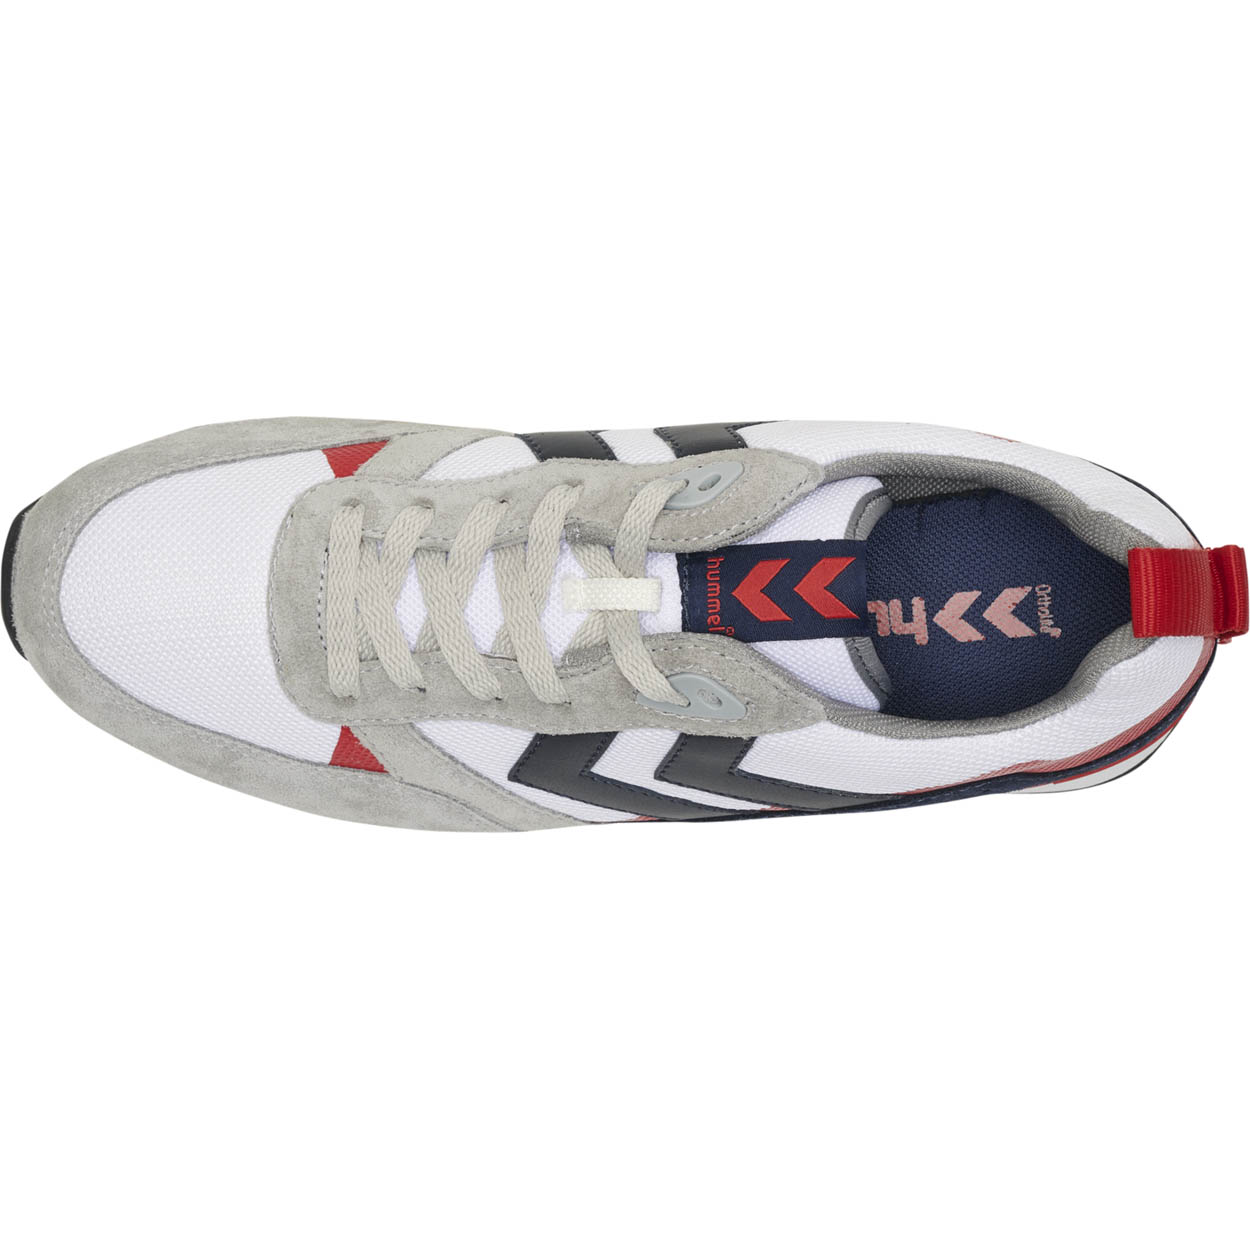 212197-9253_HUMMEL_chaussures_sneakers_lifestyle_THOR_white_blue_red_sgequipement (4)